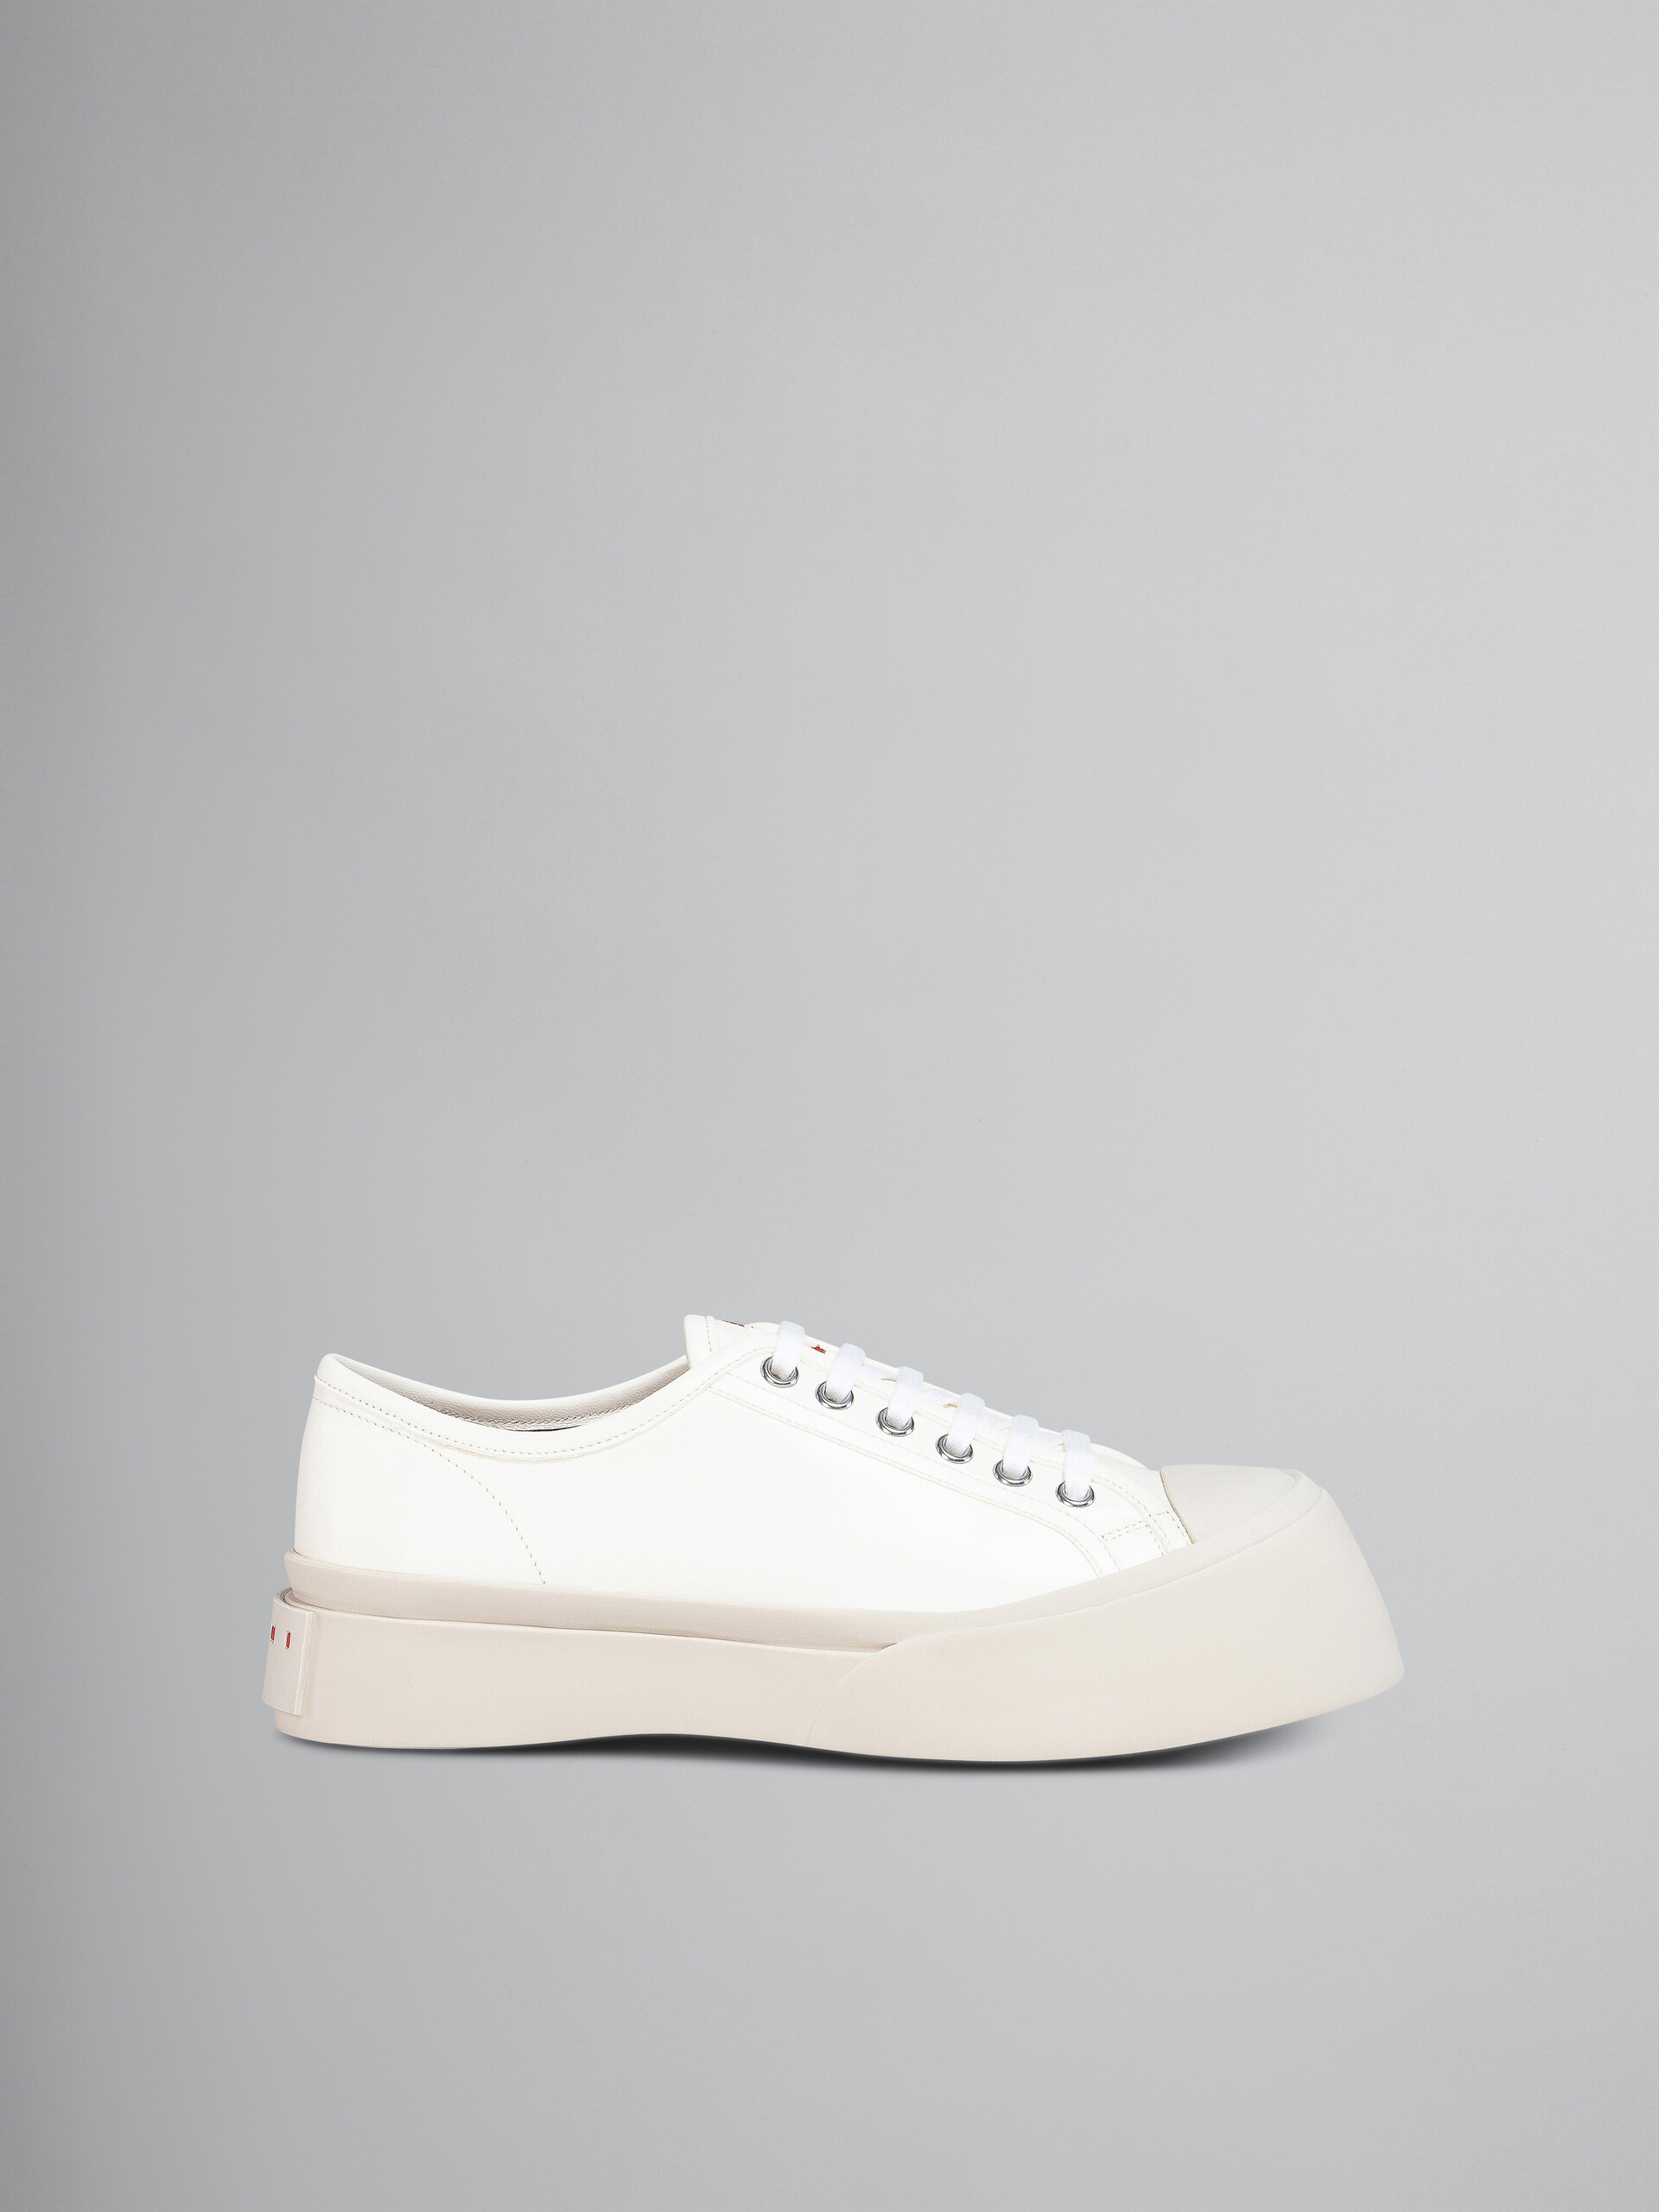 White nappa leather Pablo lace-up sneaker - Sneakers - Image 1